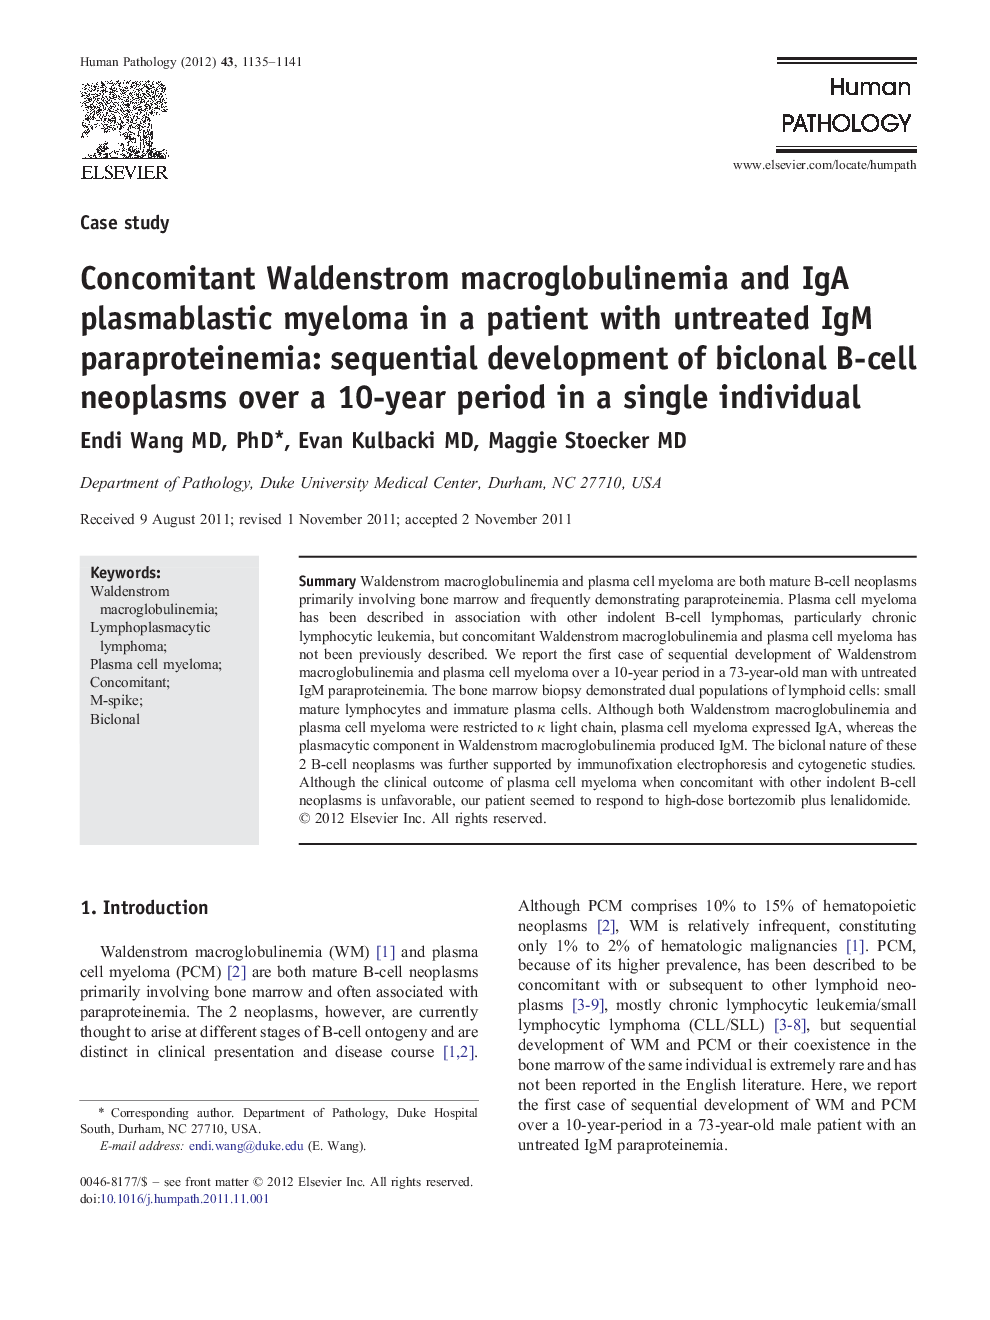 Concomitant Waldenstrom macroglobulinemia and IgA plasmablastic myeloma in a patient with untreated IgM paraproteinemia: sequential development of biclonal B-cell neoplasms over a 10-year period in a single individual